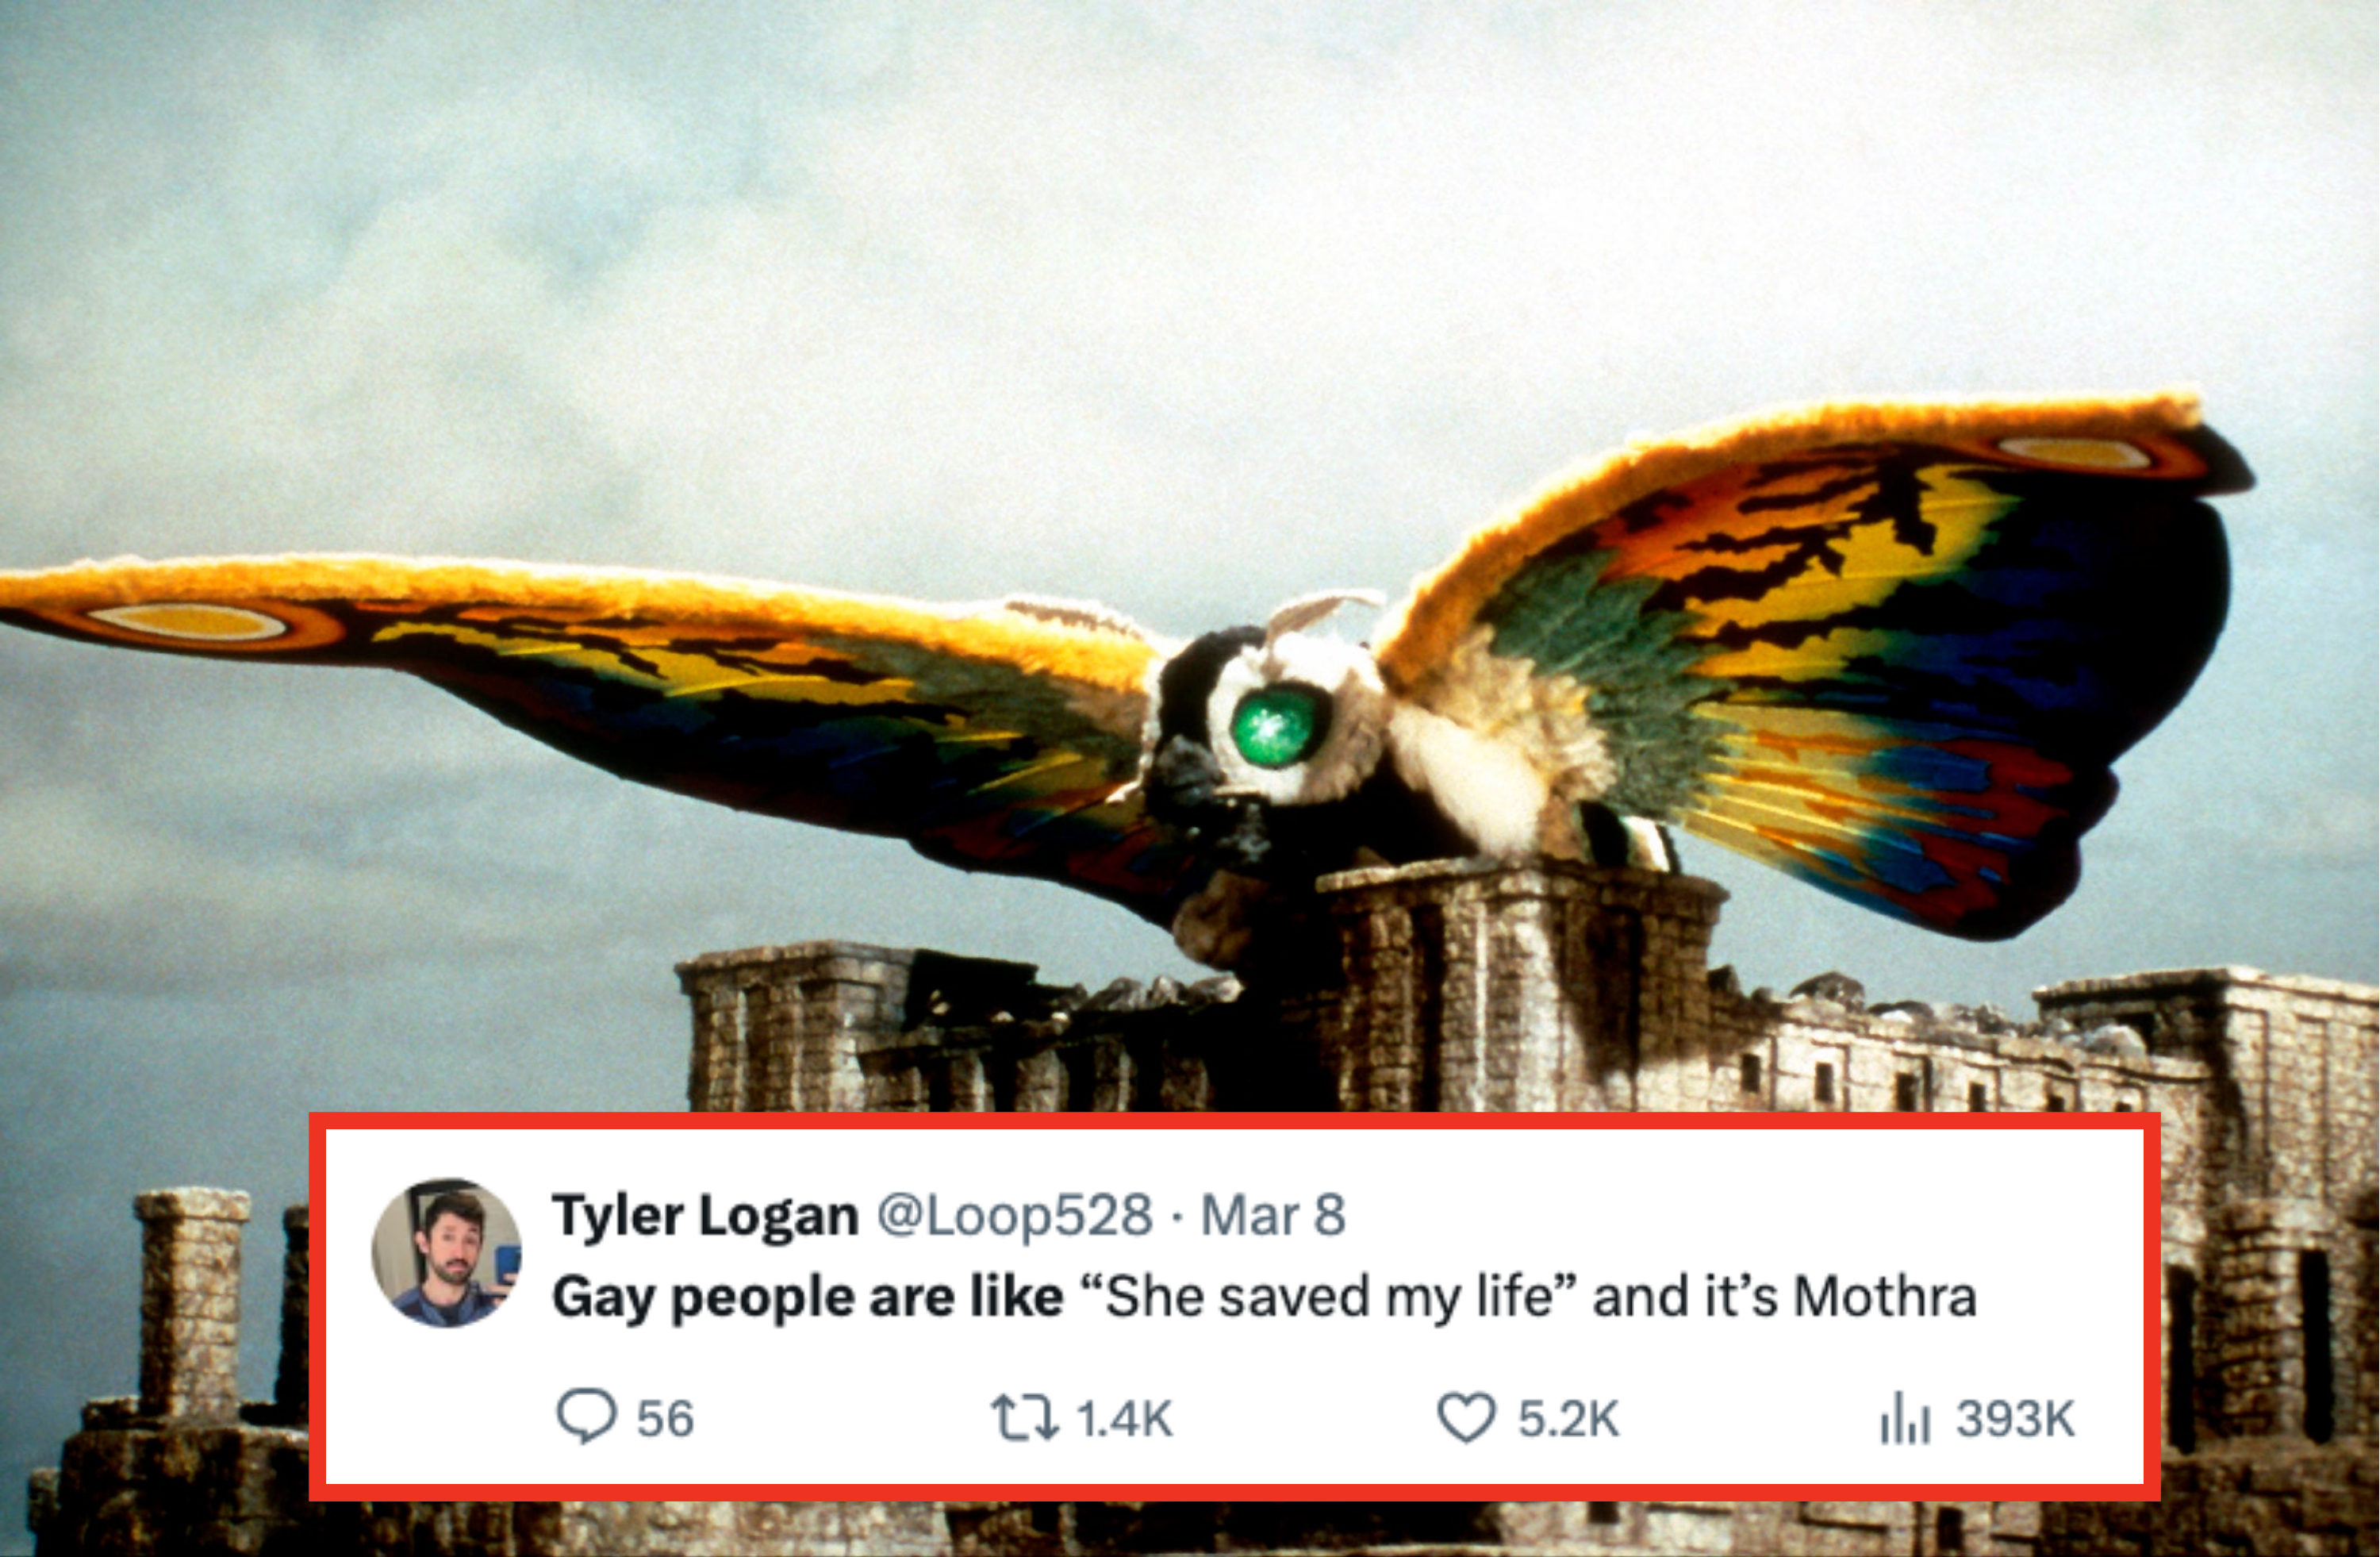 A CGI owl with rainbow-colored wings perched on ancient ruins